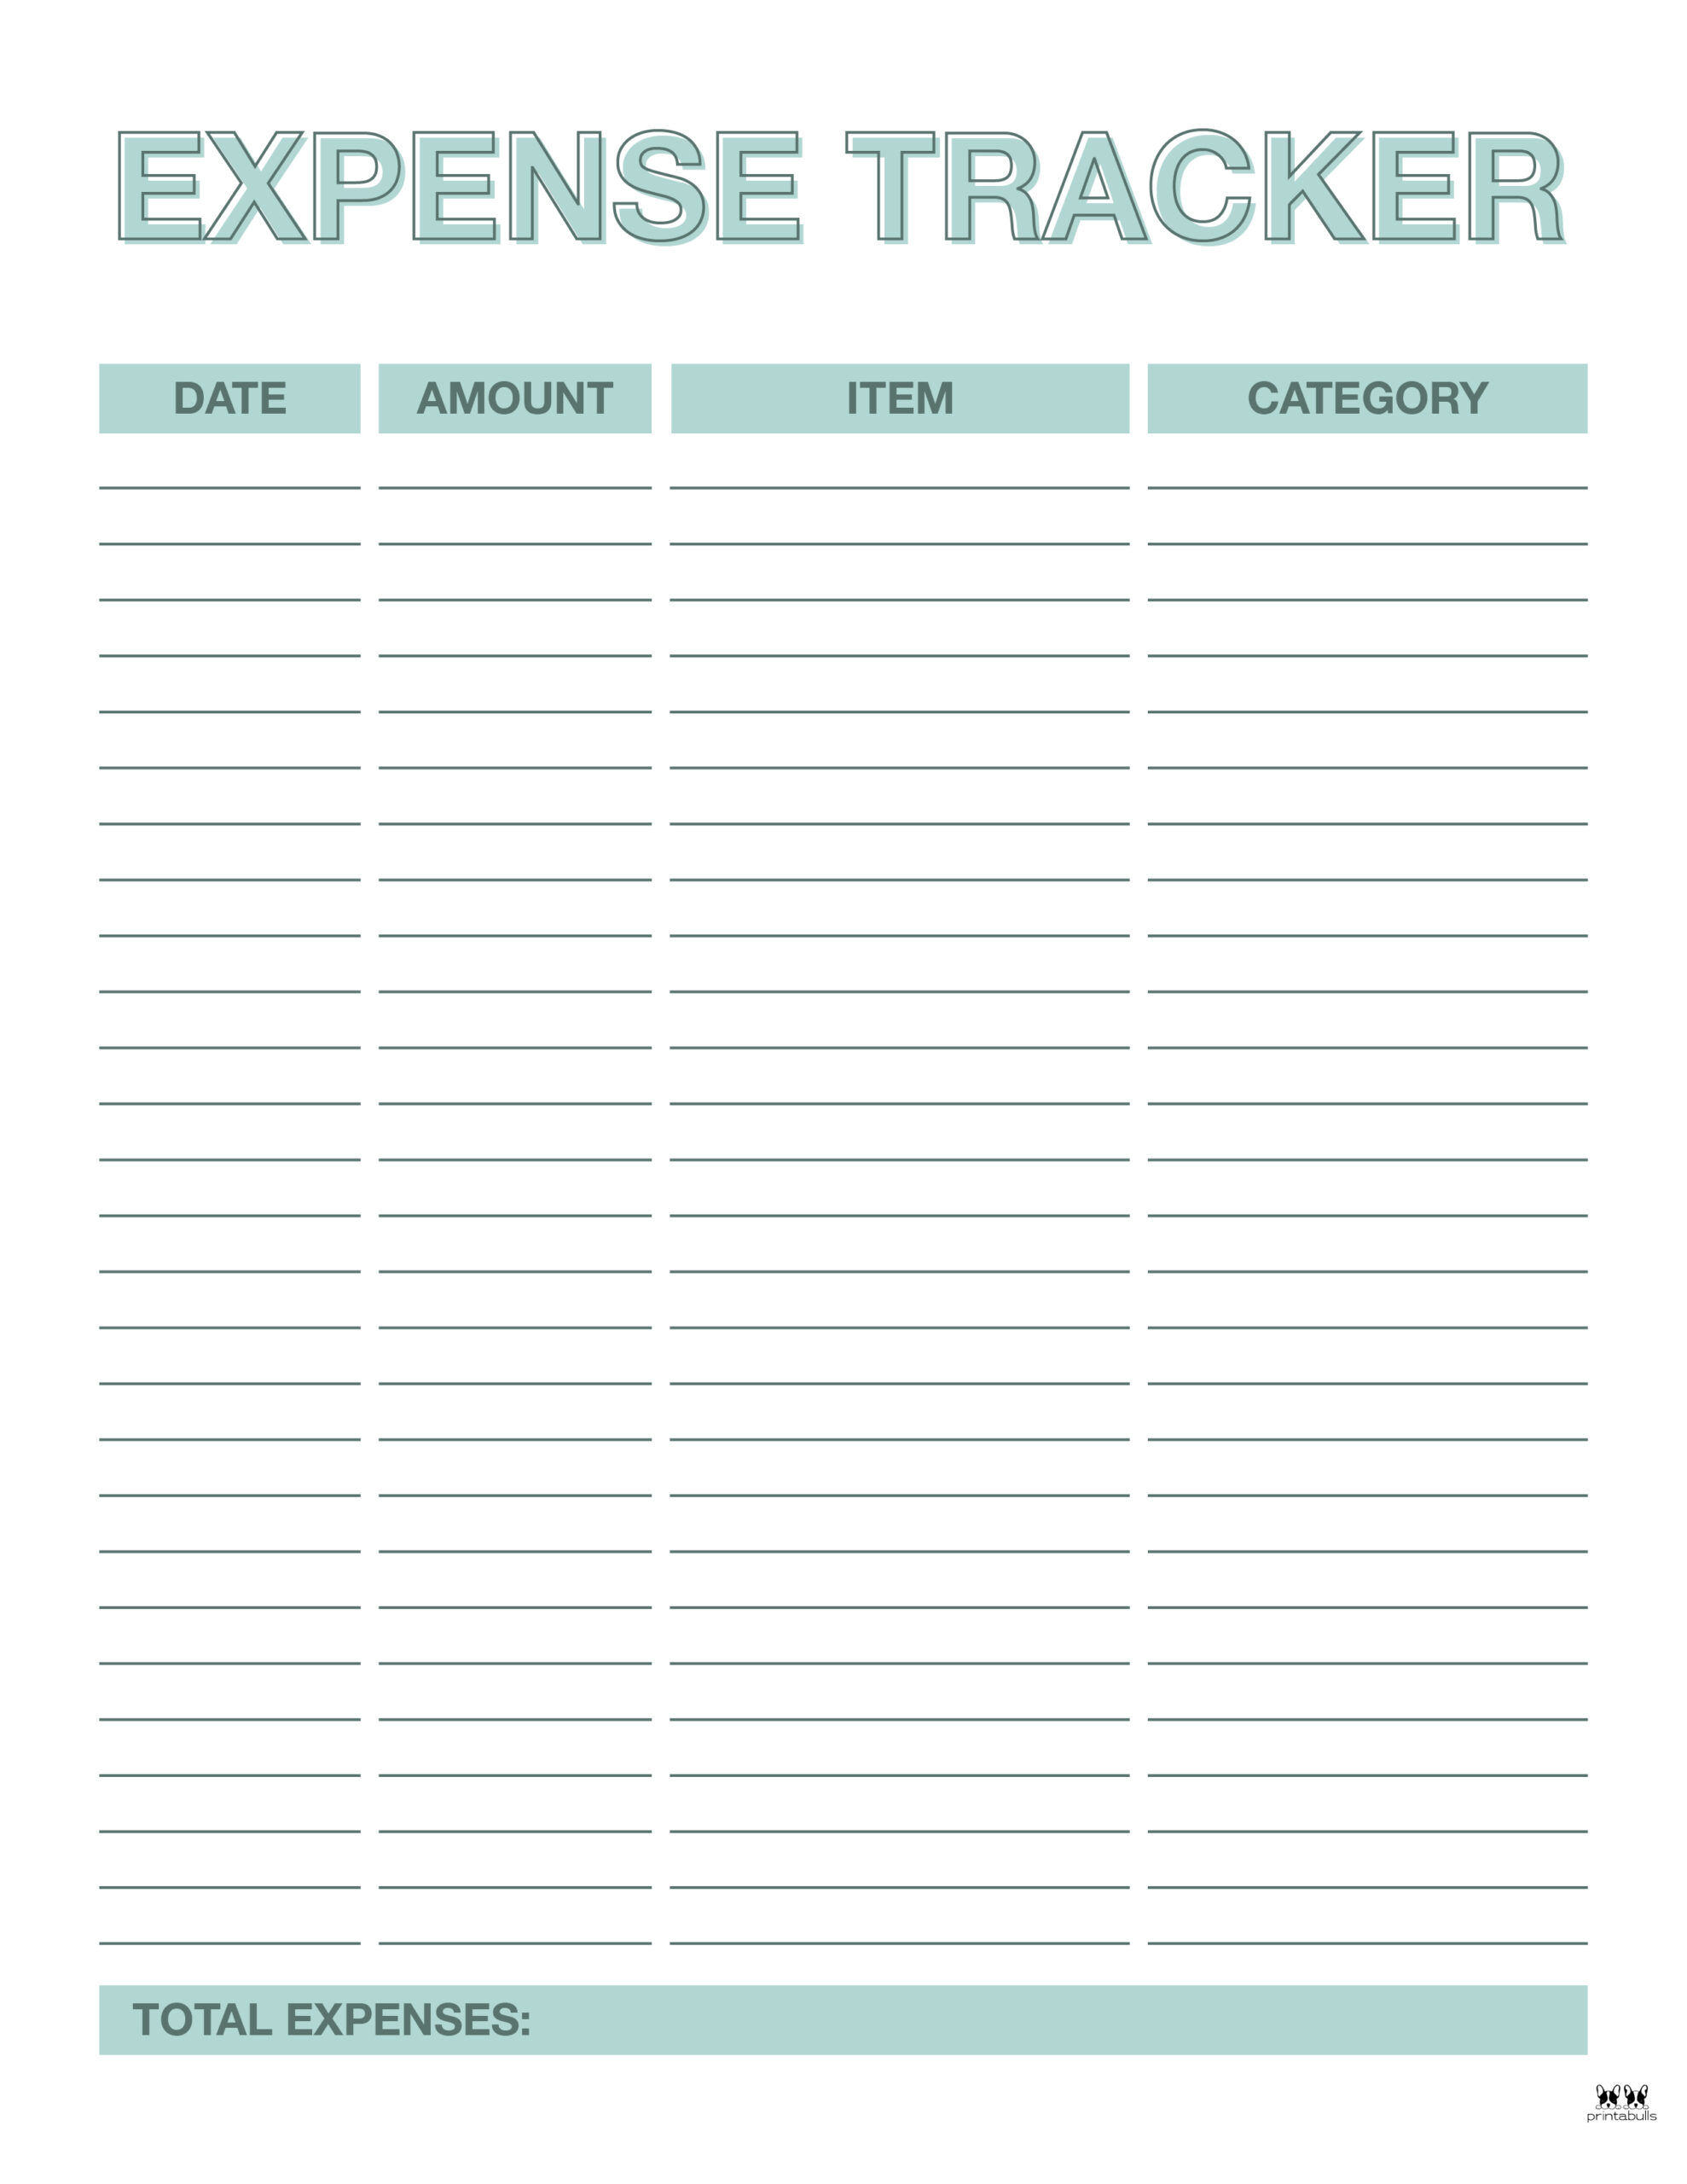 Expense Tracker Printable Charlotte Clergy Coalition Uncommonly Google Unique Ways To Use